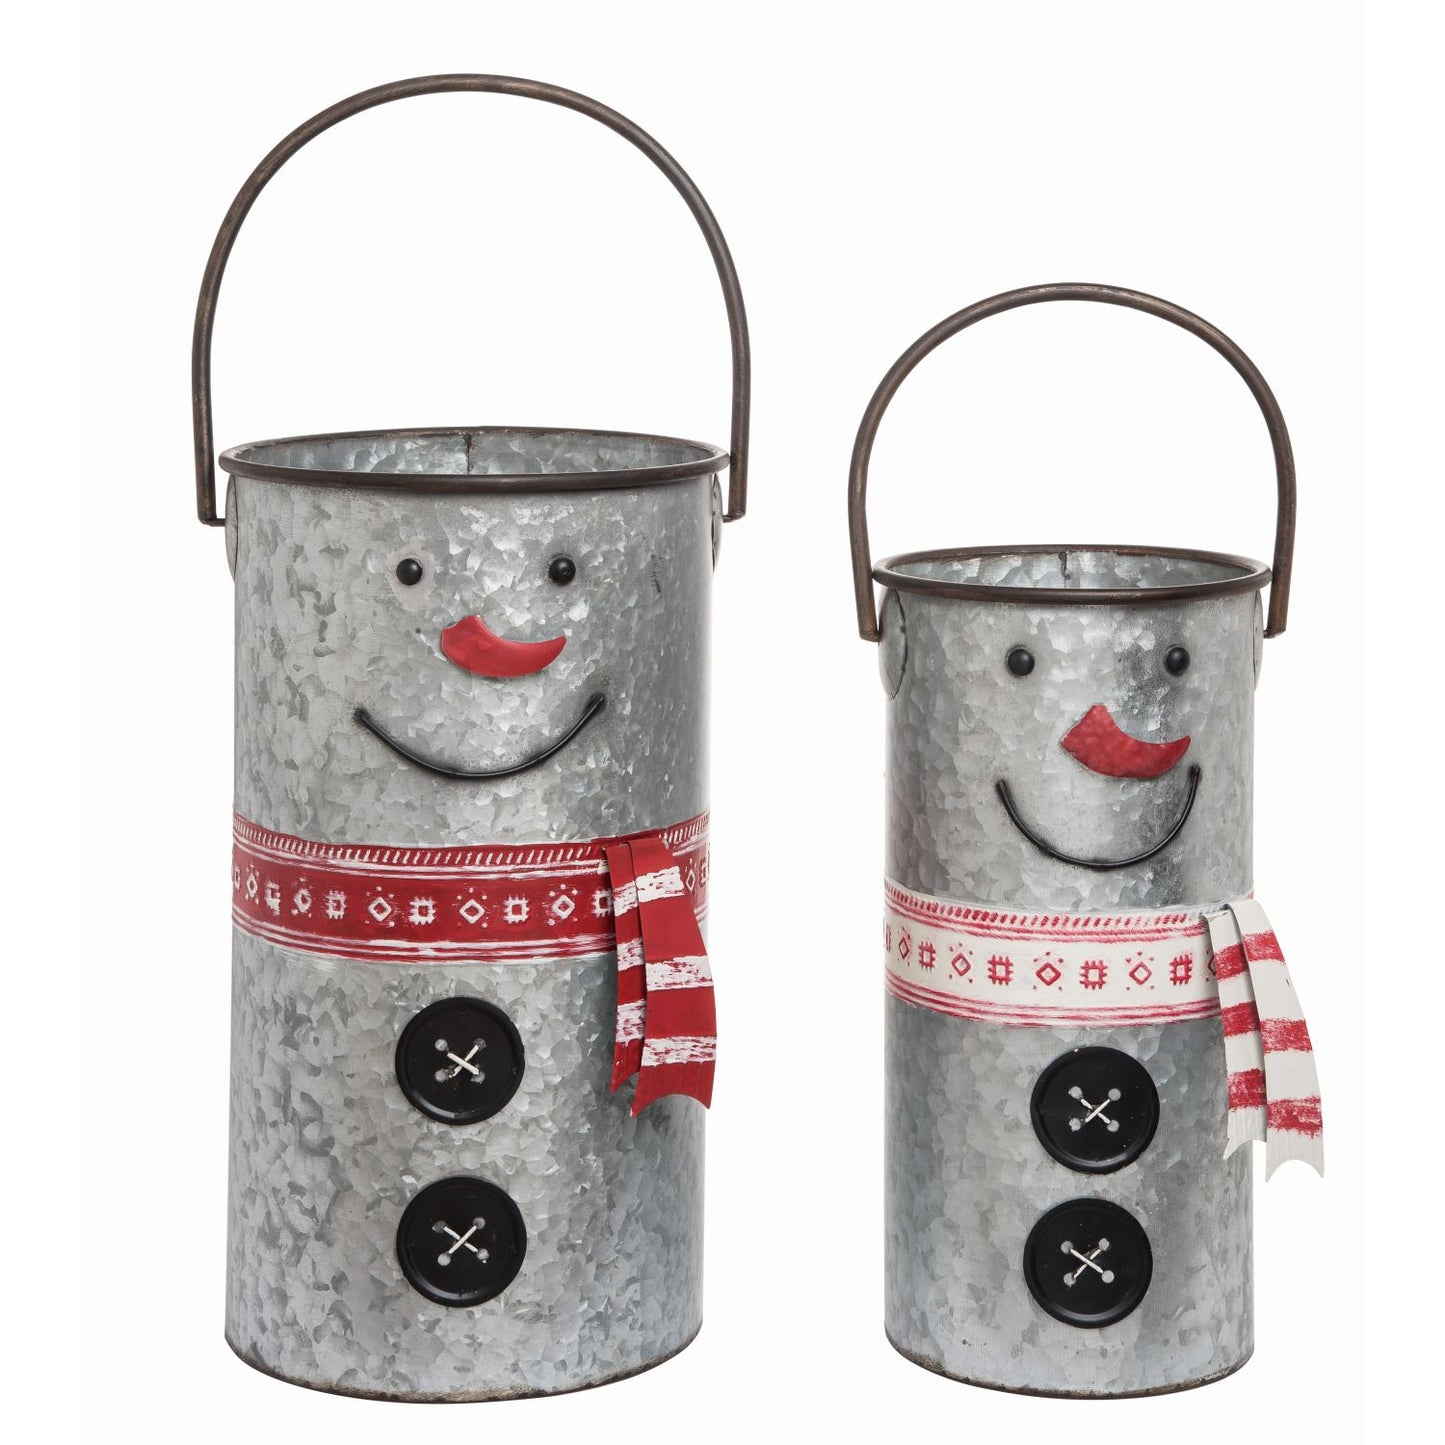 Transpac Galvanized Metal Snowman Containers, Set Of 2